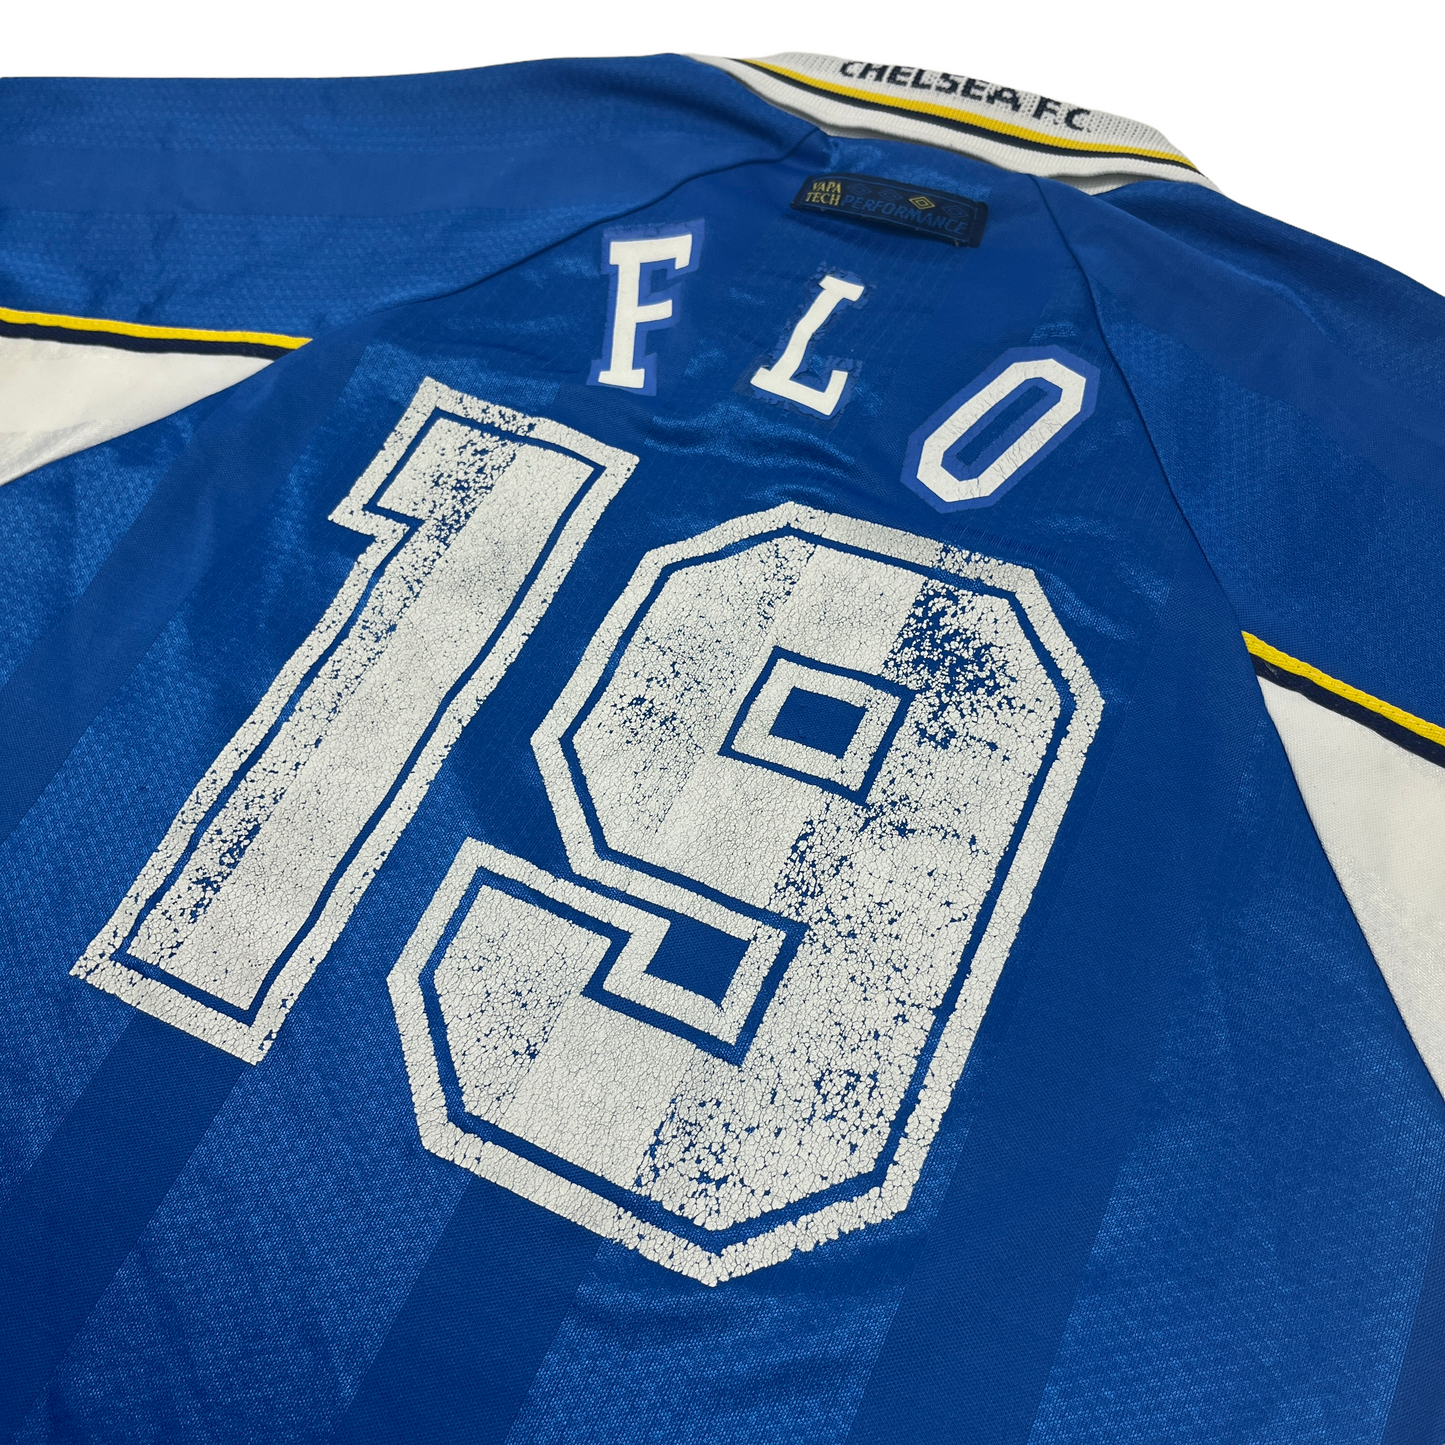 01550 Umbro FC Chelsea „Tore André Flo“ 98/99 Home Jersey